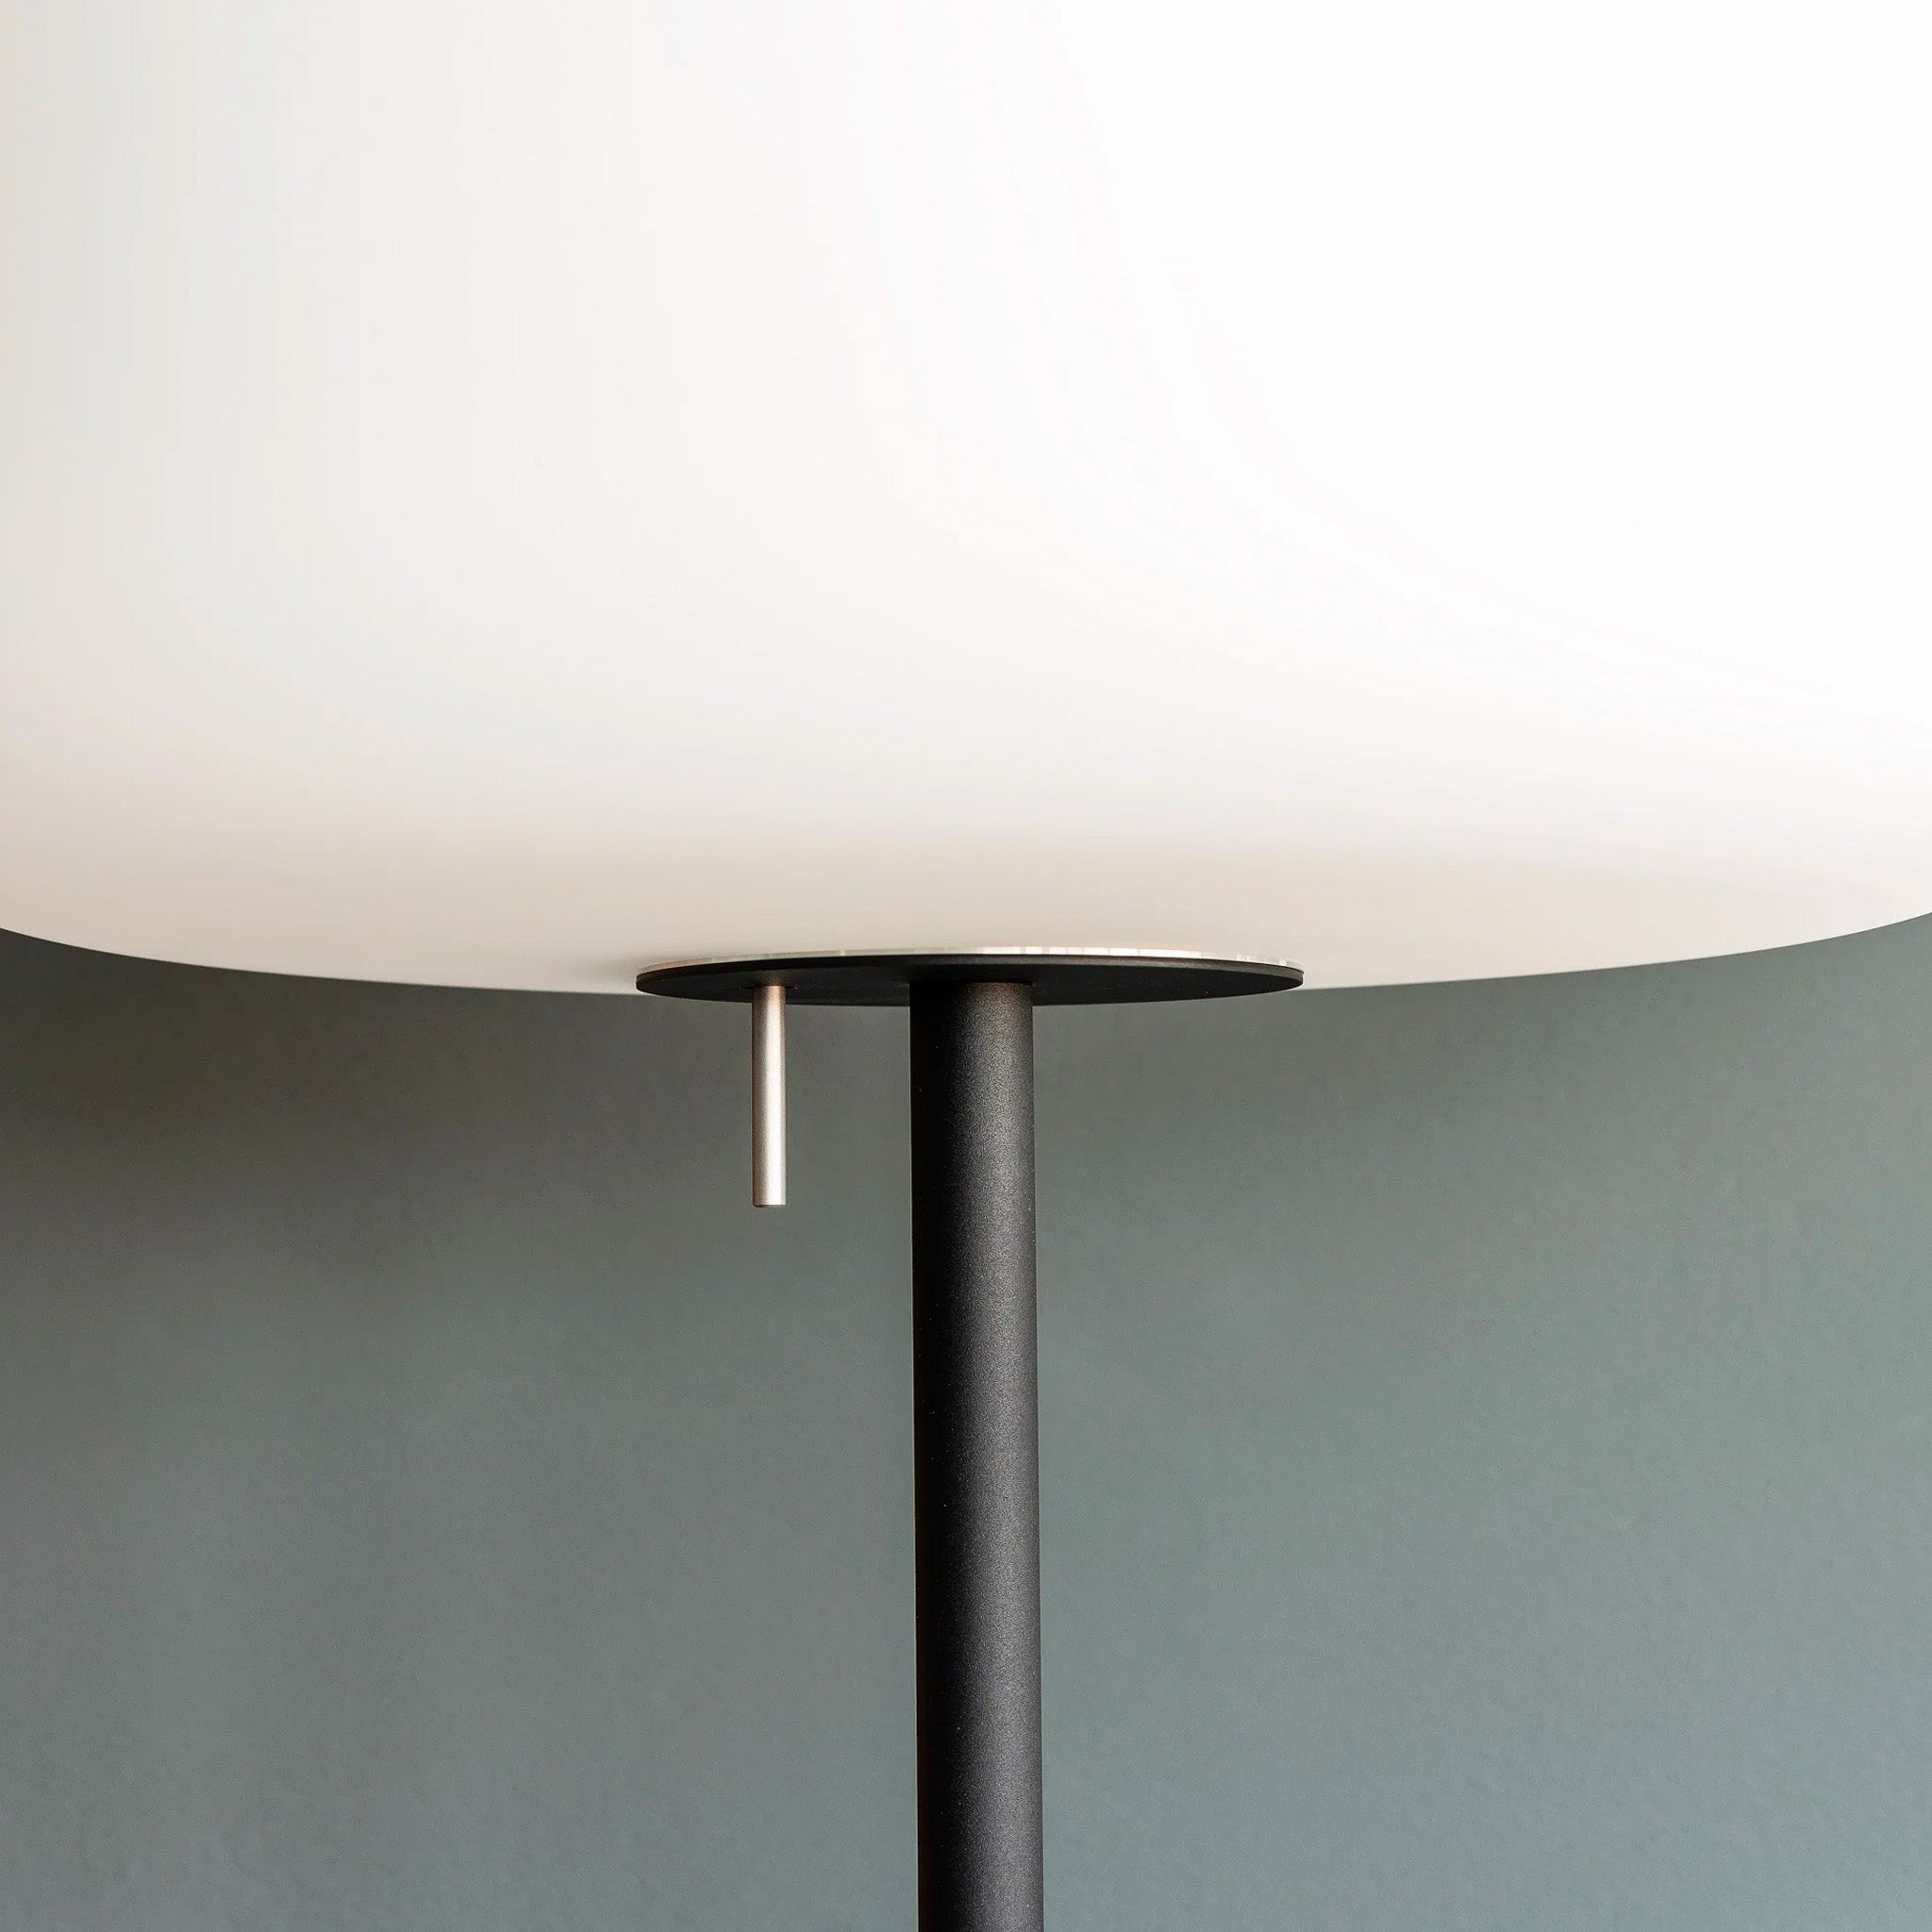 Soft Floor Lamp by Terence Woodgate